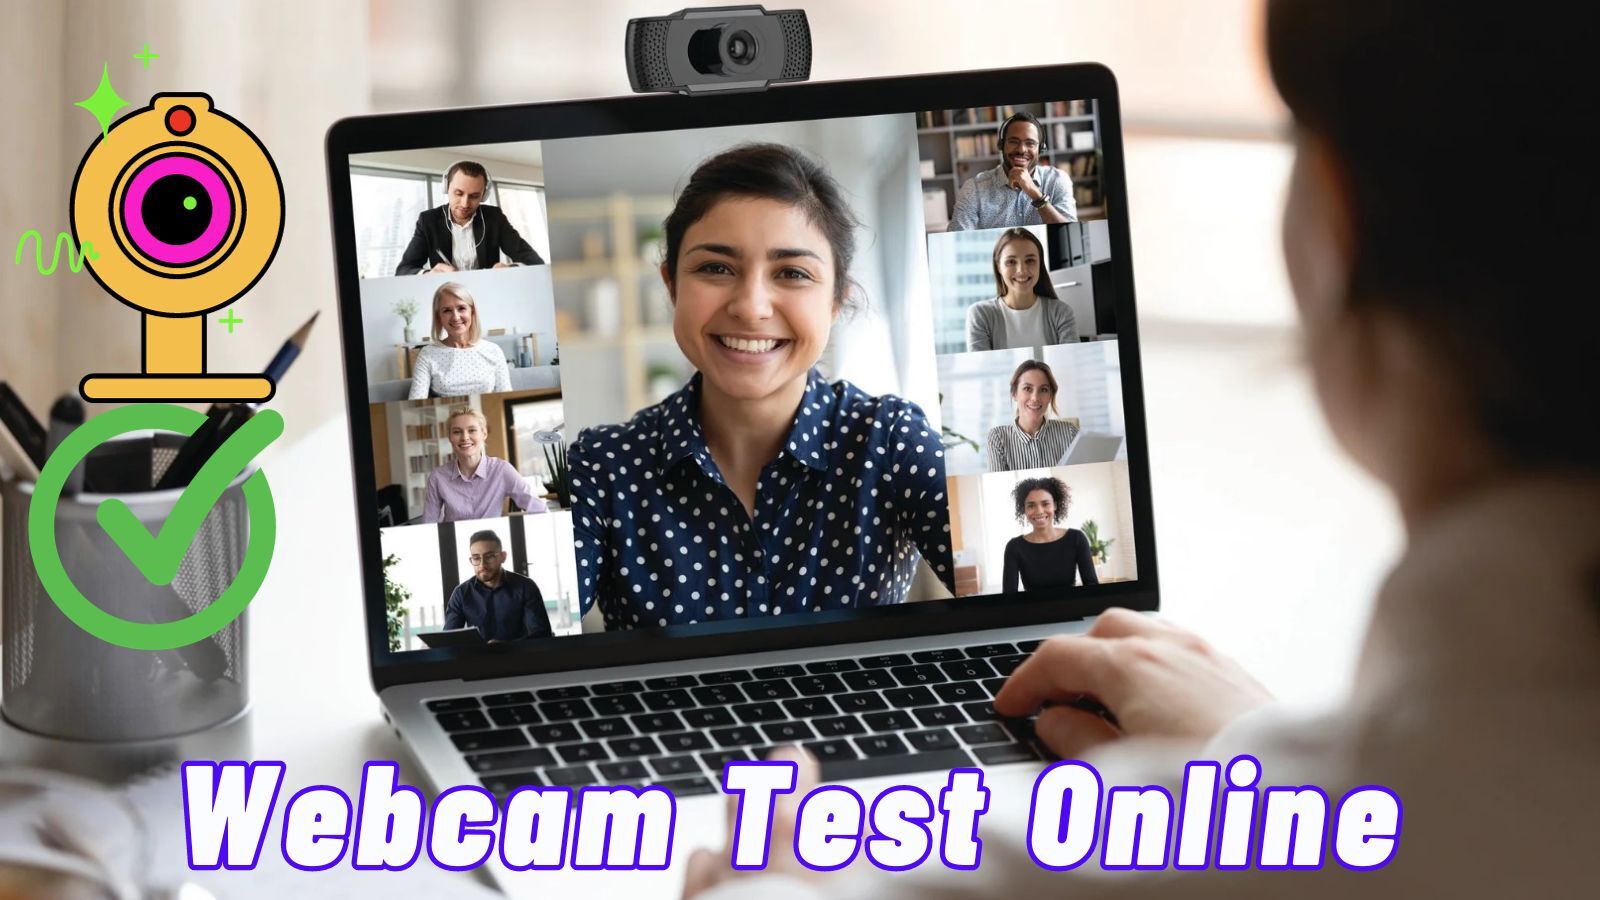 Webcam Test Online: Why, How and the Troubleshoot